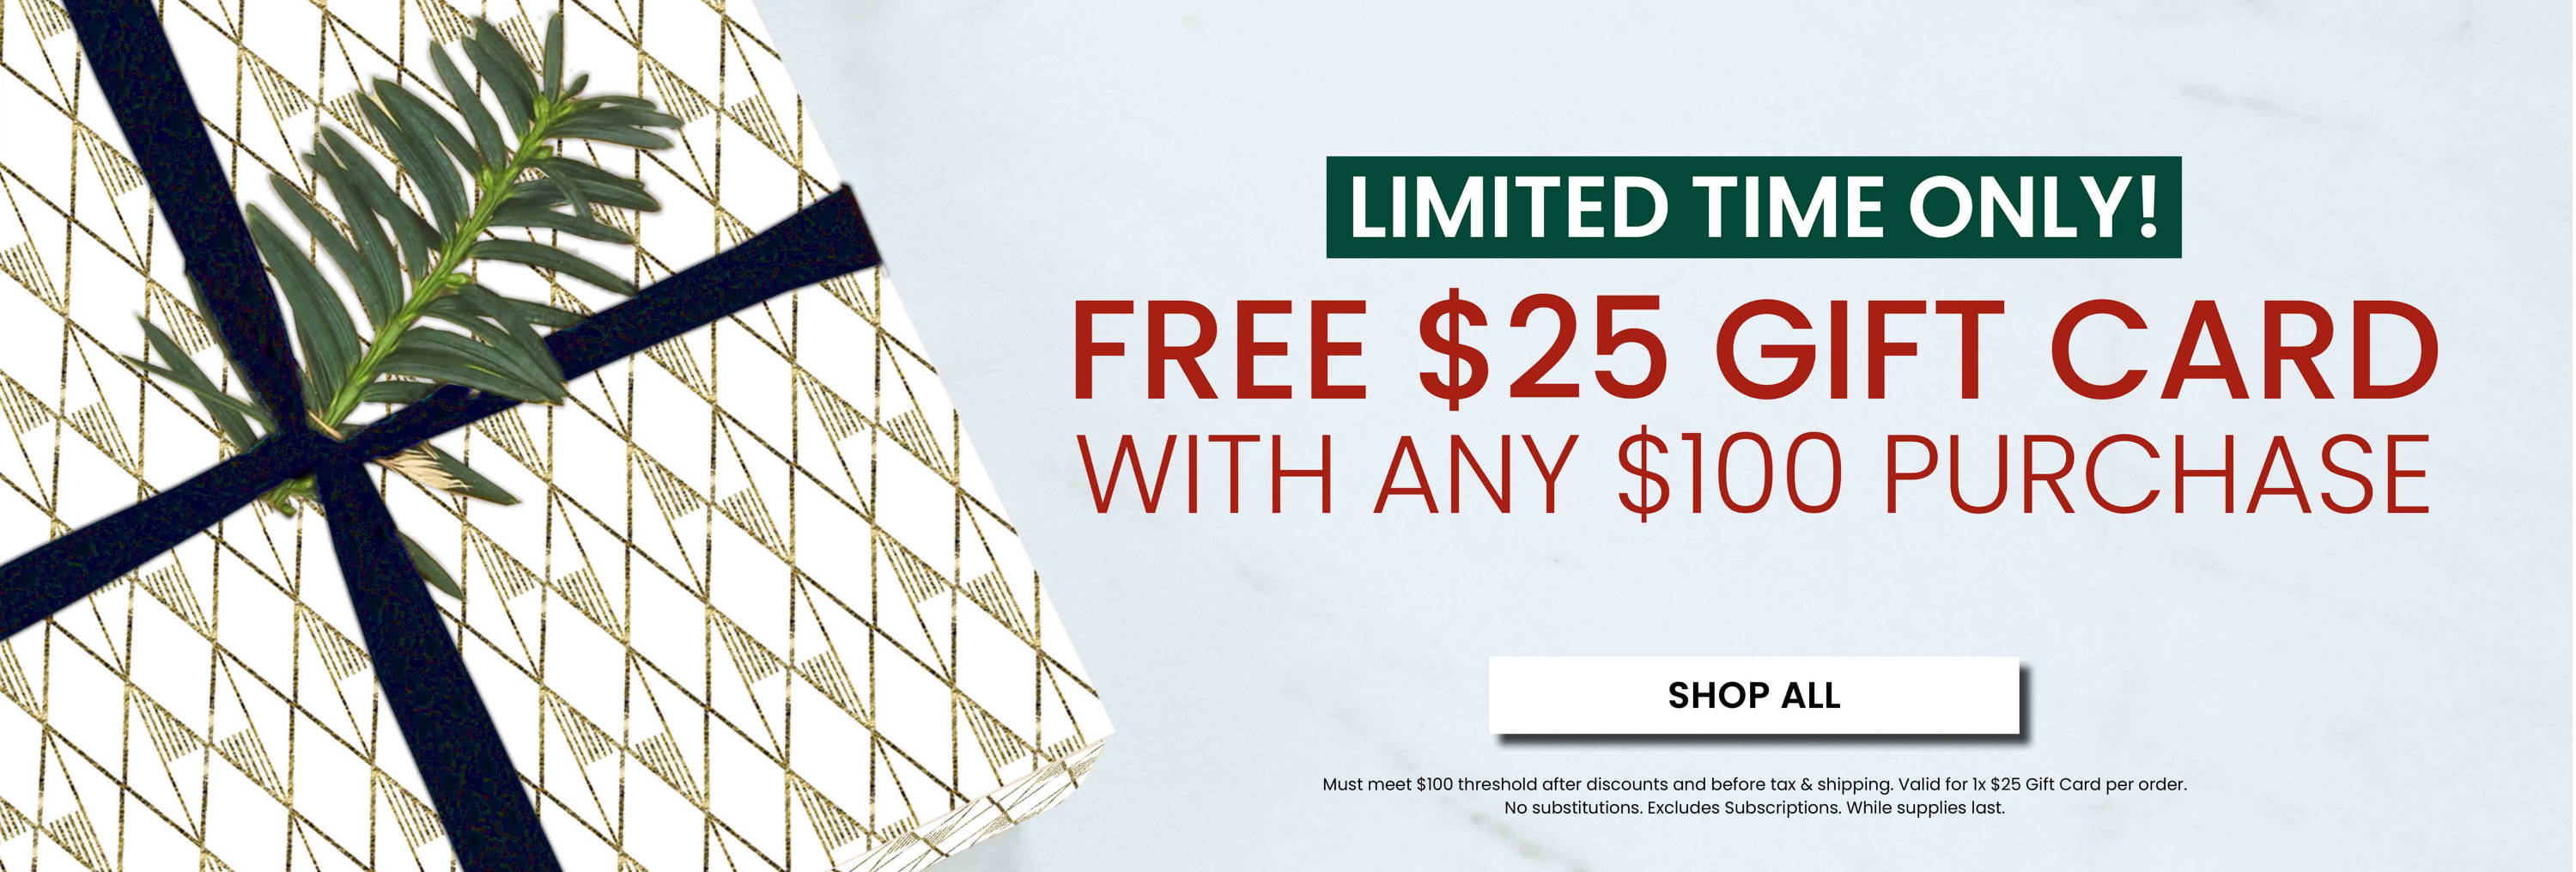 Limited Time Only! Free $25 Gift Card with any $100 Purchase.